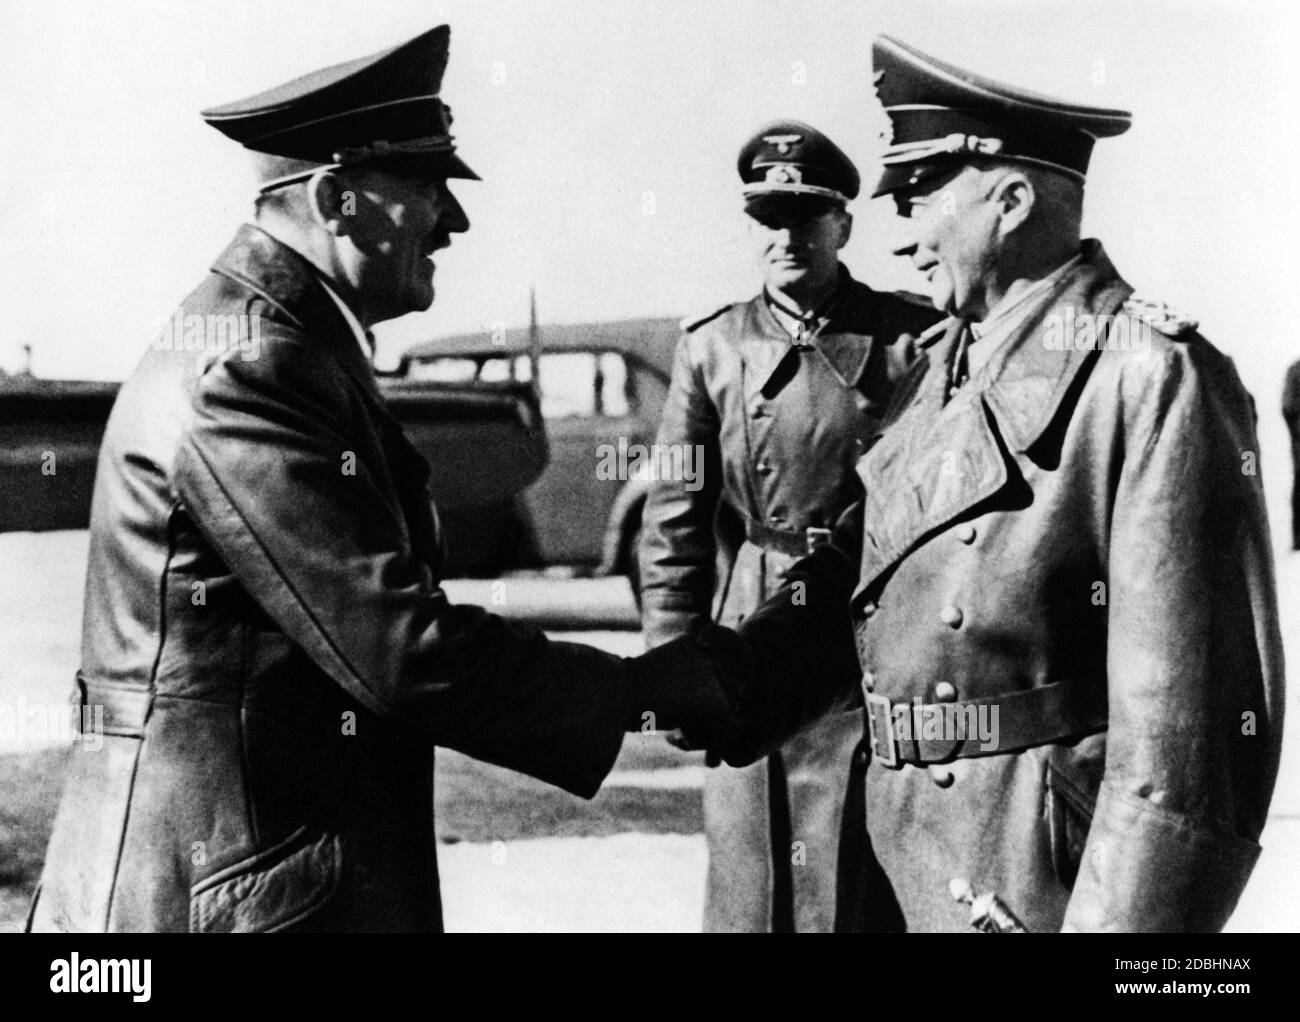 Hitler and Kluge after the assassination attempt of July 20, 1944, in which Kluge was also involved and because of which he took his own life at Verdun in France after being relieved of all offices. In his farewell letter, Kluge affirmed his loyalty to Hitler, but advised the latter to end the hopeless war. Stock Photo